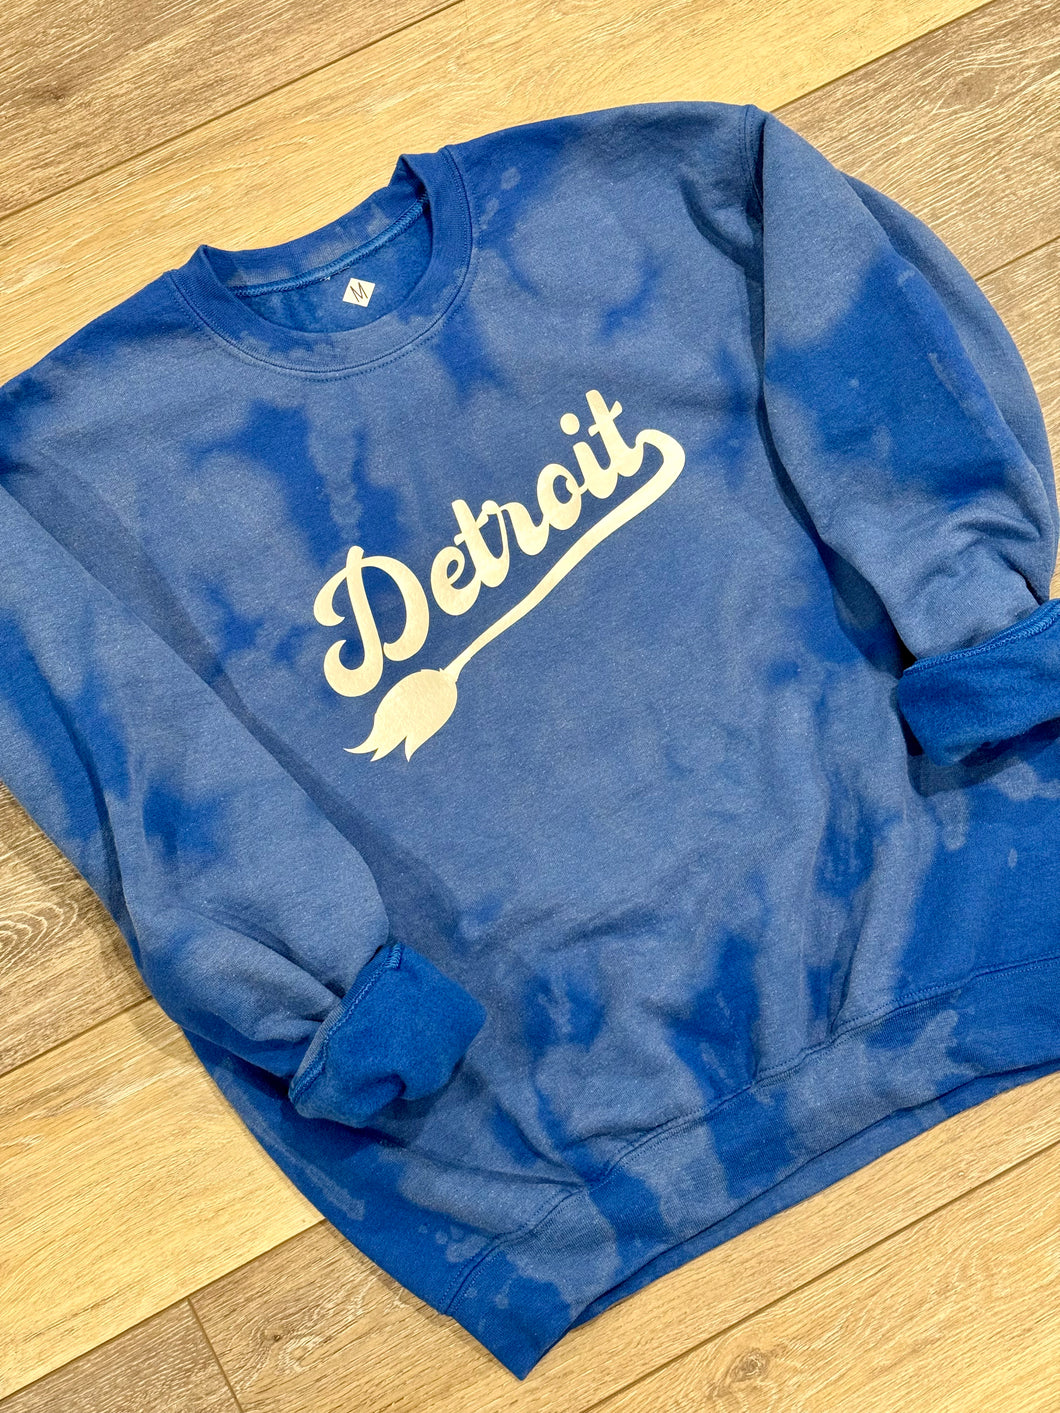 Detroit with Lion Tail Bleach Dyed Sweatshirt